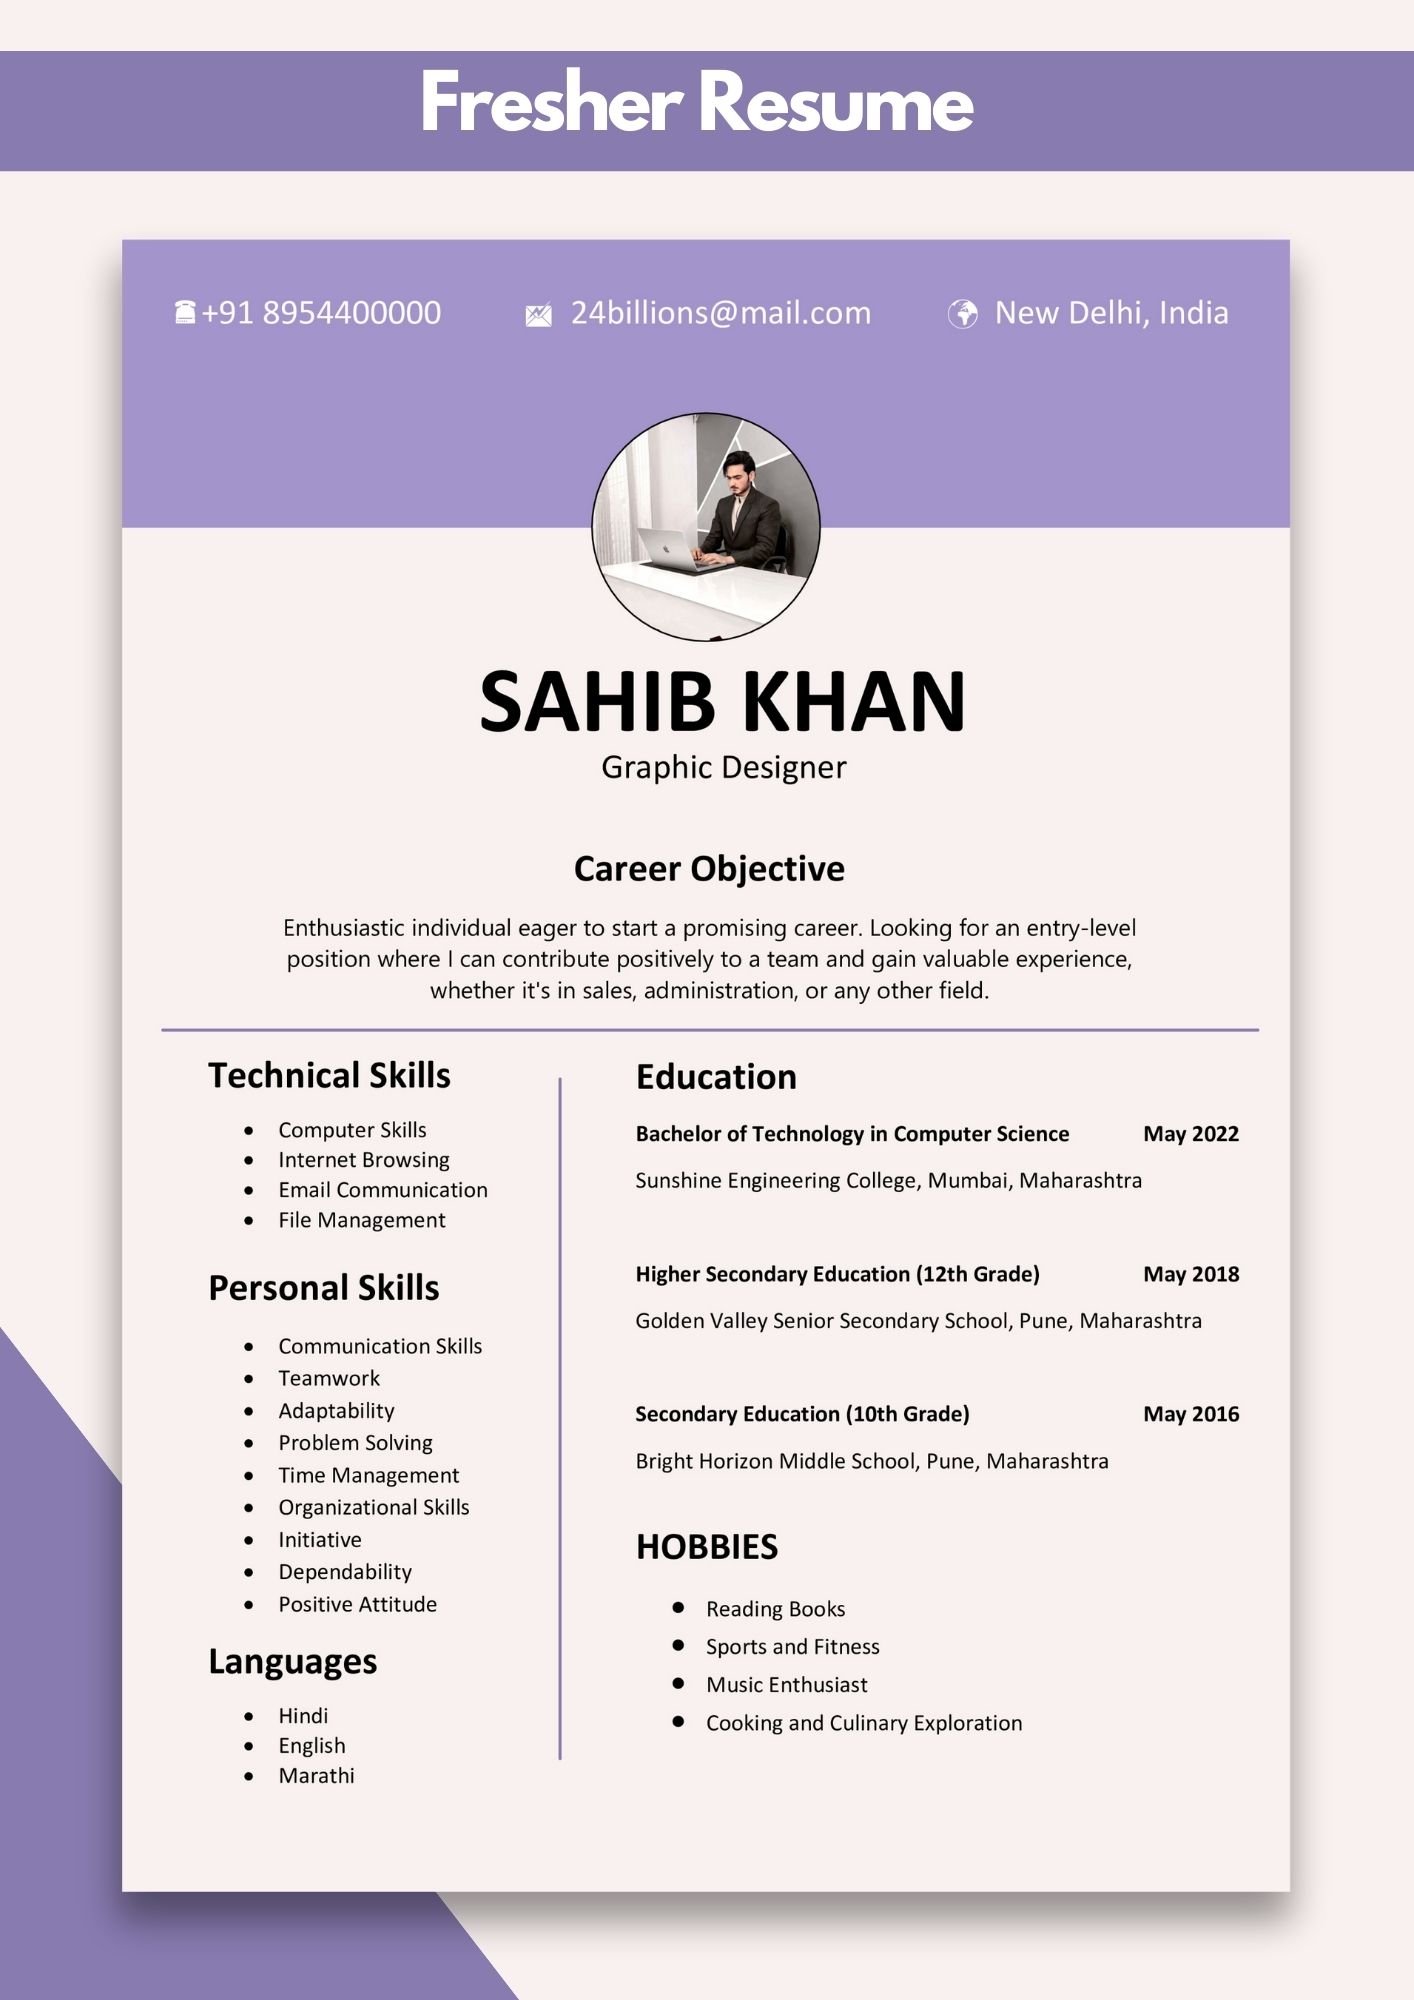 Format for Resume for Freshers | Resume Format for a Fresher